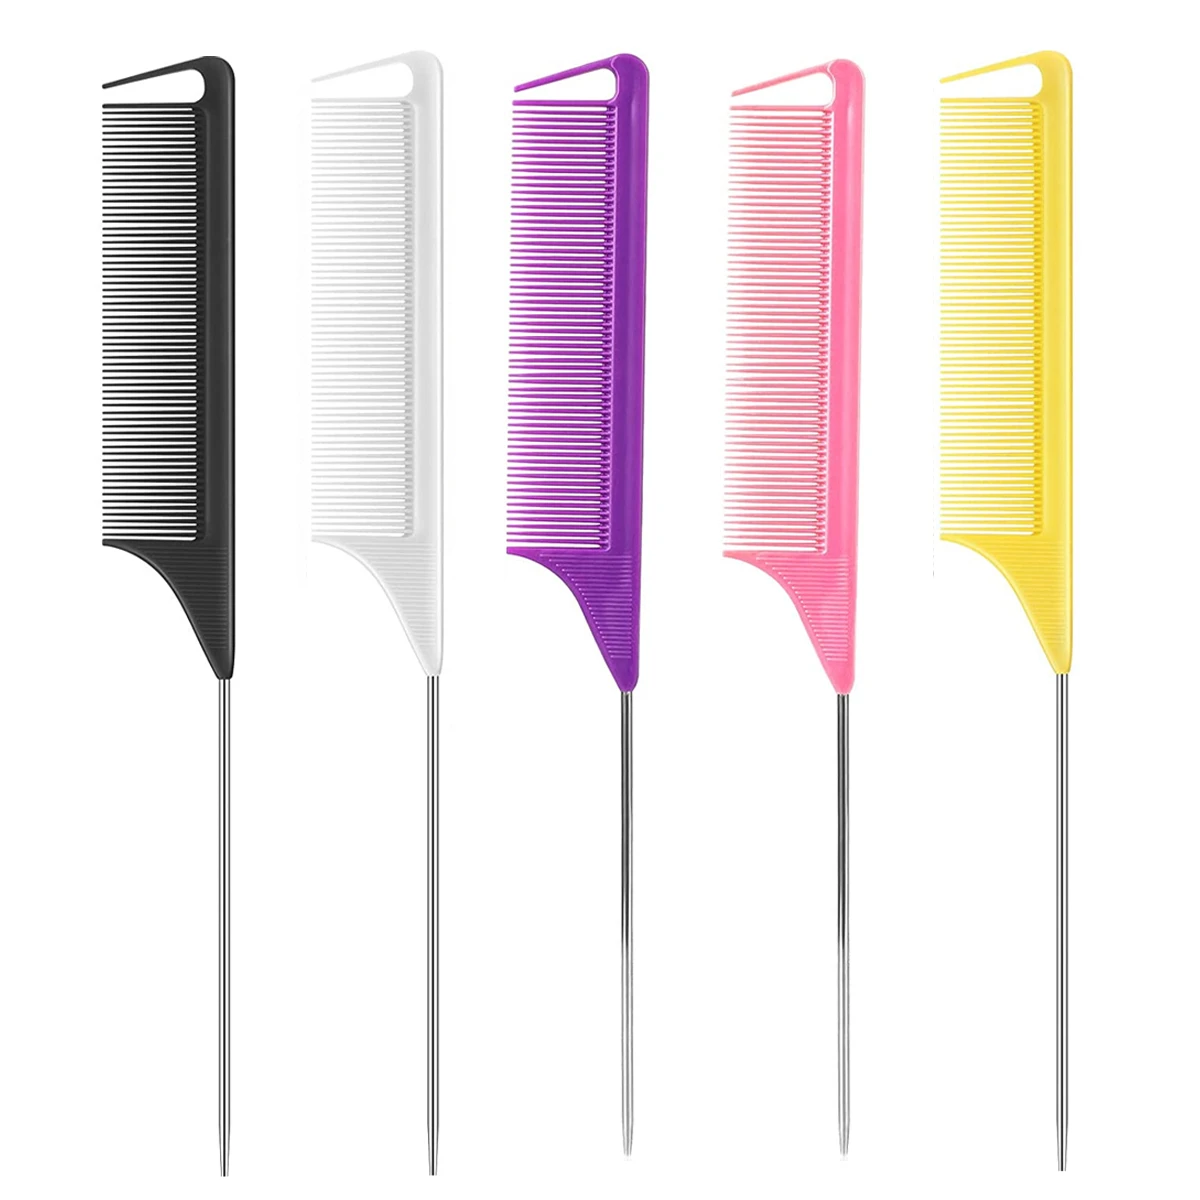 Highlighting hair styling comb Heat Resistant Pin rat tip tail comb Antistatic Separate Parting Hair salon professional Combs